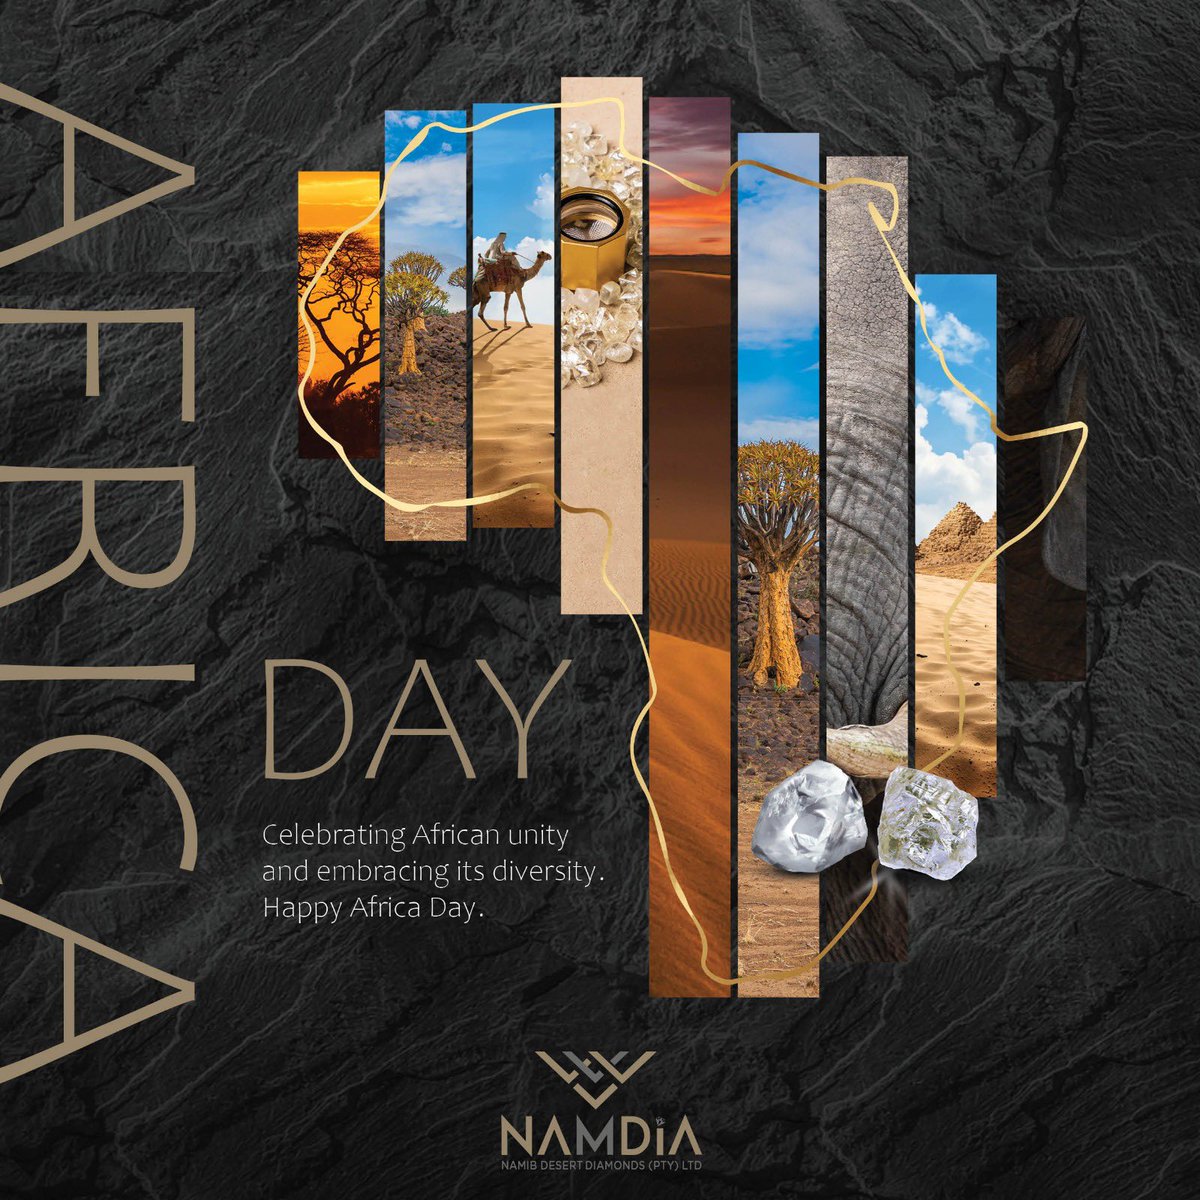 Happy Africa Day! A continent filled with history, natural wealth and abundant knowledge. #namdia #africaday #roughdiamonds #naturaldiamonds #namibiaqueenofdiamonds